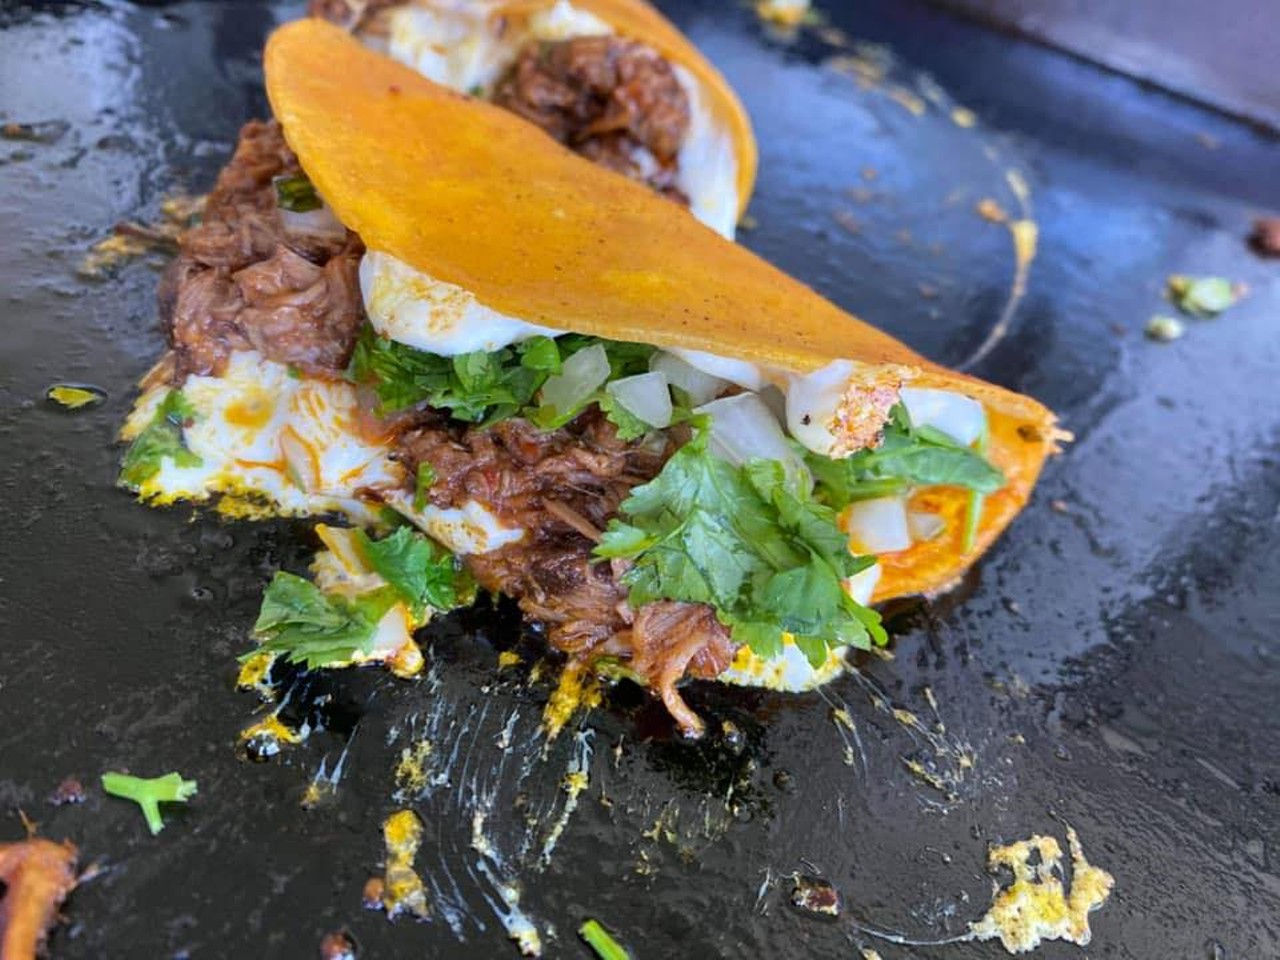 L&eacute; Taco Trap 
4286 Columbia St.
We guess you can say birria is life at L&eacute; Taco Trap, as they&#146;ve managed to make birria tacos, eggrolls, pizzas, and empanadas spinoffs. Don&#146;t forget to grab a dessert taco while you&#146;re there. 
Photo via L&eacute; Taco Trap/Facebook